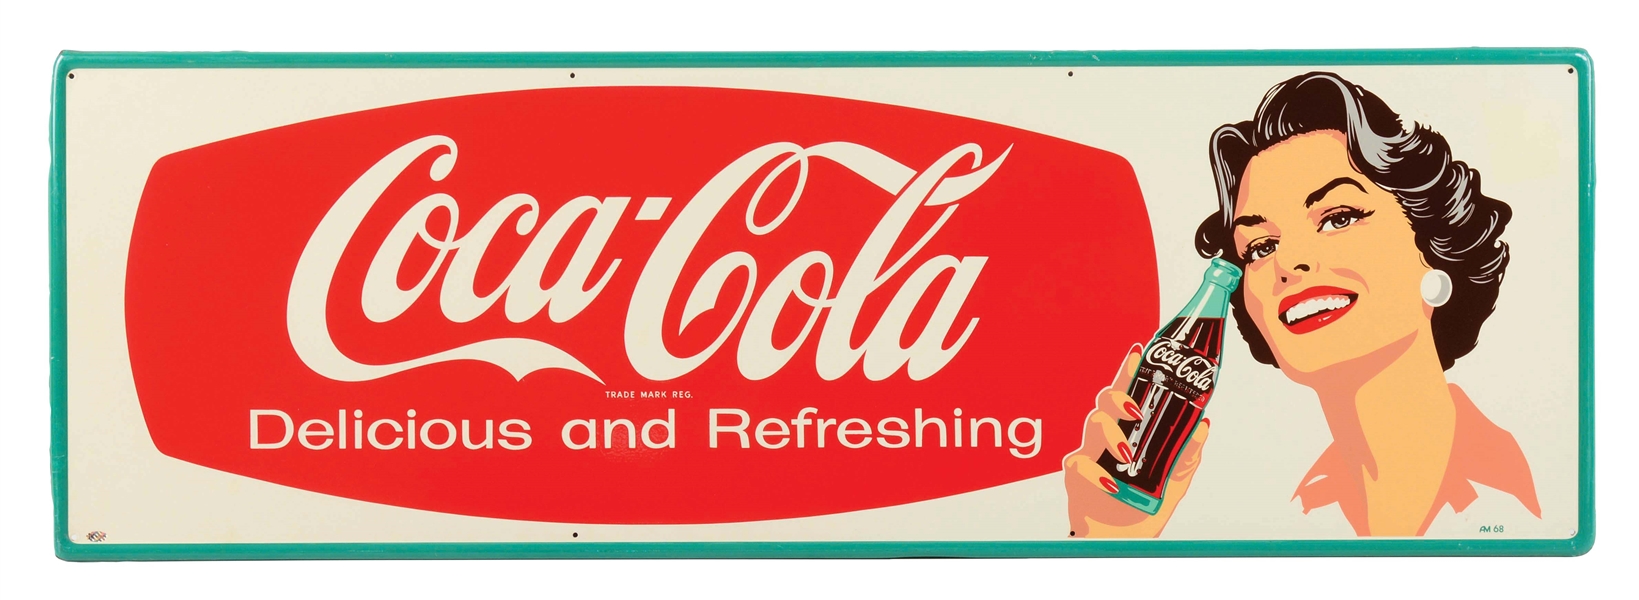 OUTSTANDING COCA COLA "DELICIOUS AND REFRESHING" TIN SIGN W/ WOMAN GRAPHIC. 